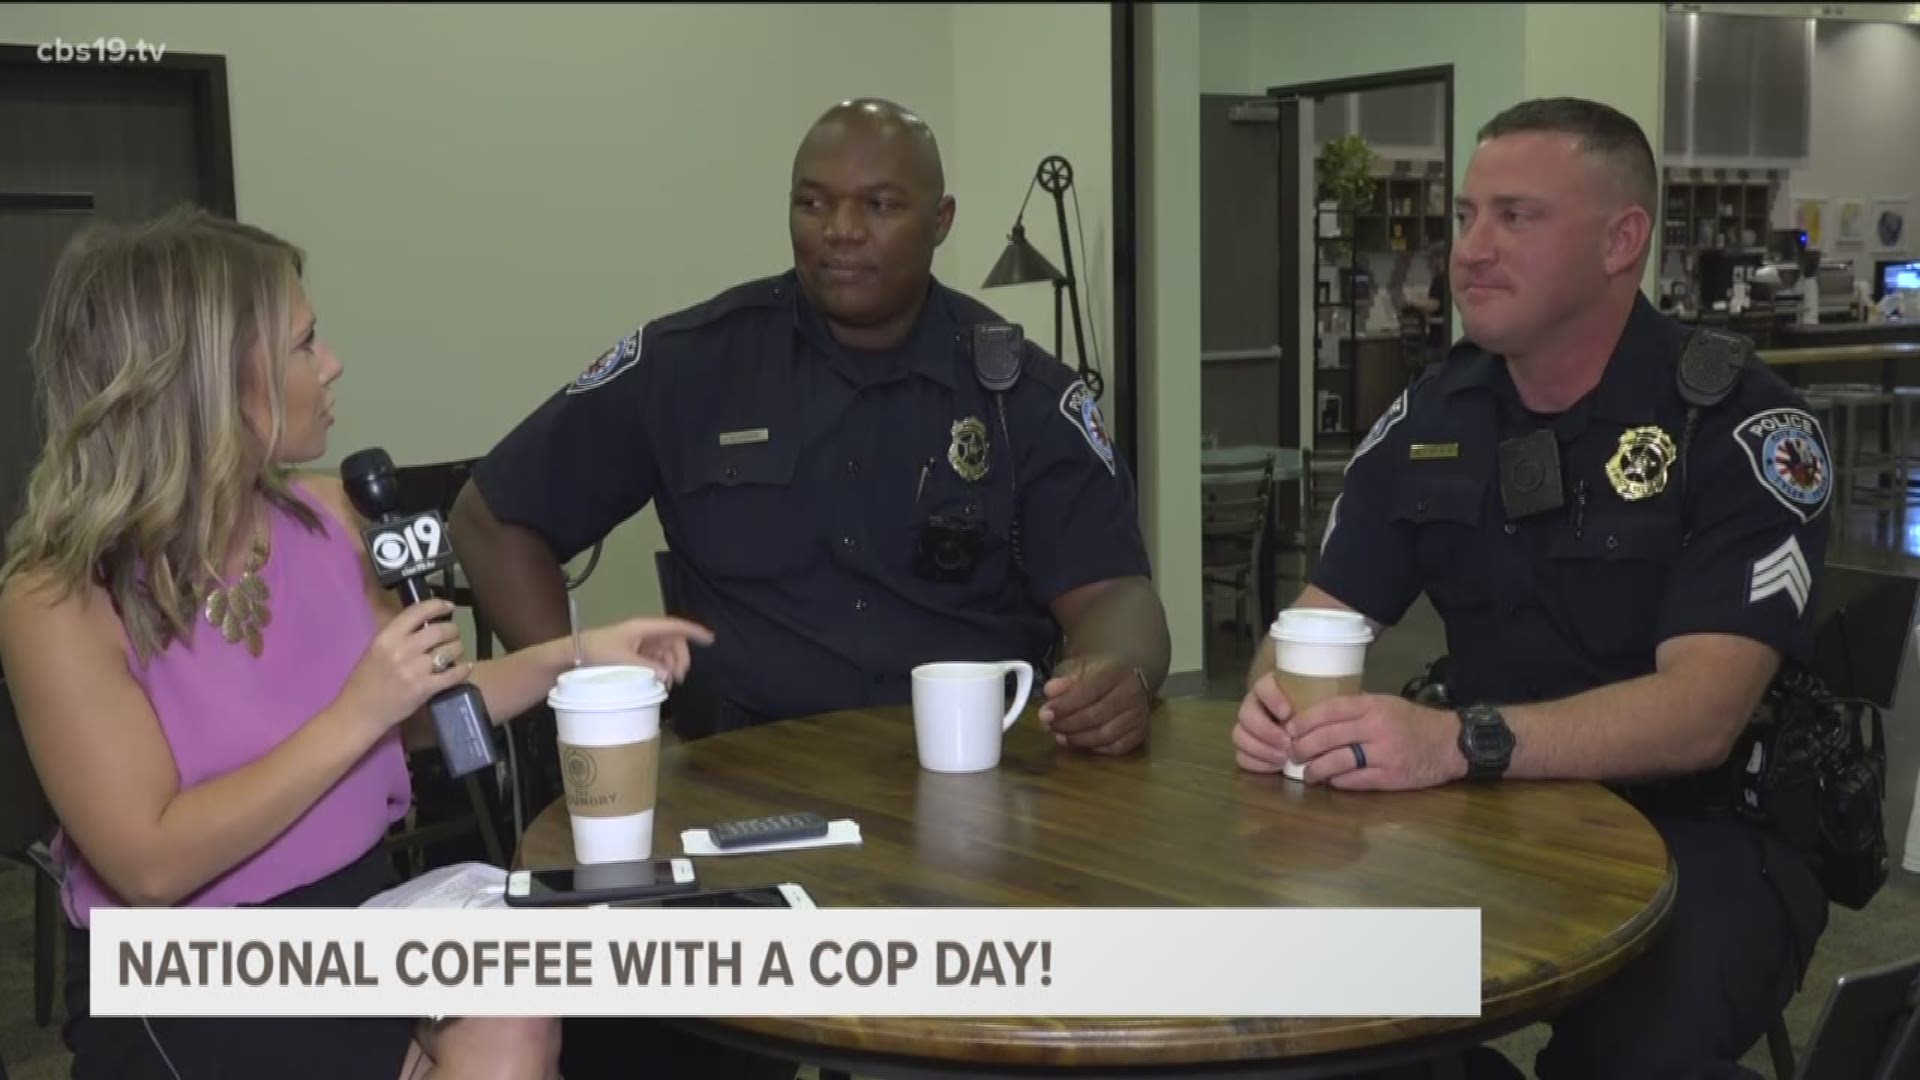 National Coffee with a Cop Day! cbs19.tv